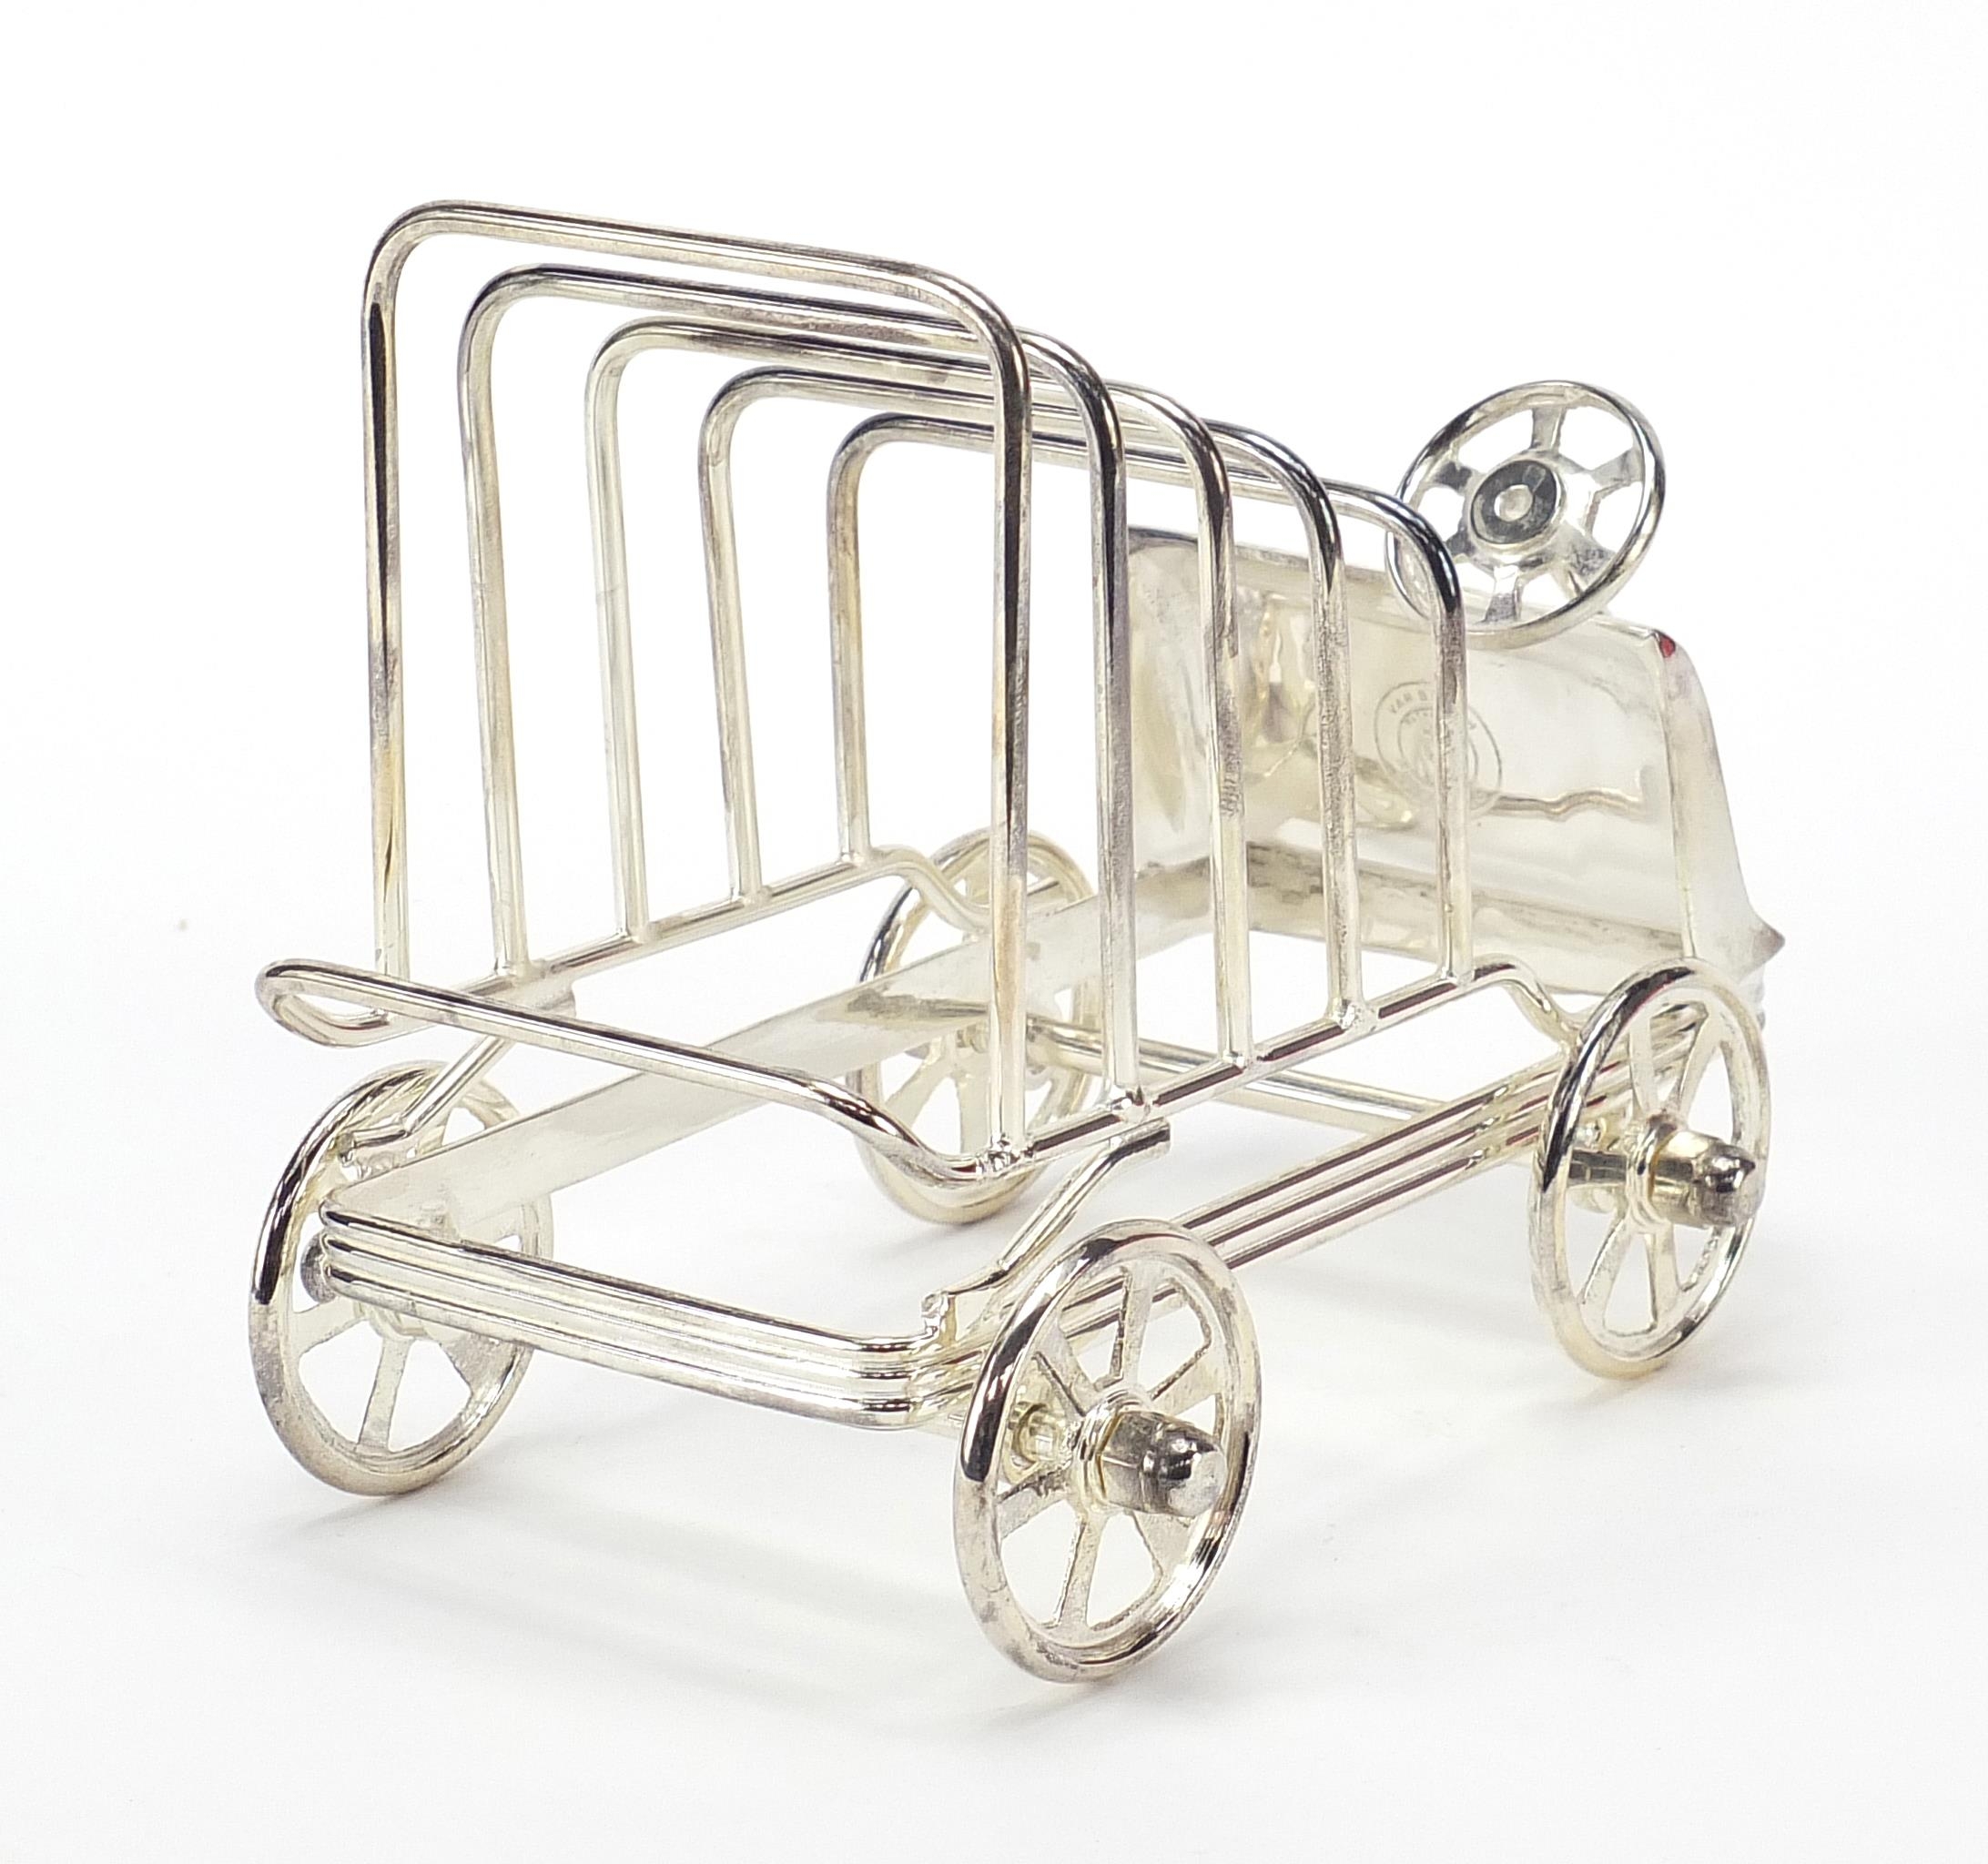 Novelty silver plated five slice toast rack in the form of a car with rotating wheels, 15.5cm in - Image 2 of 4